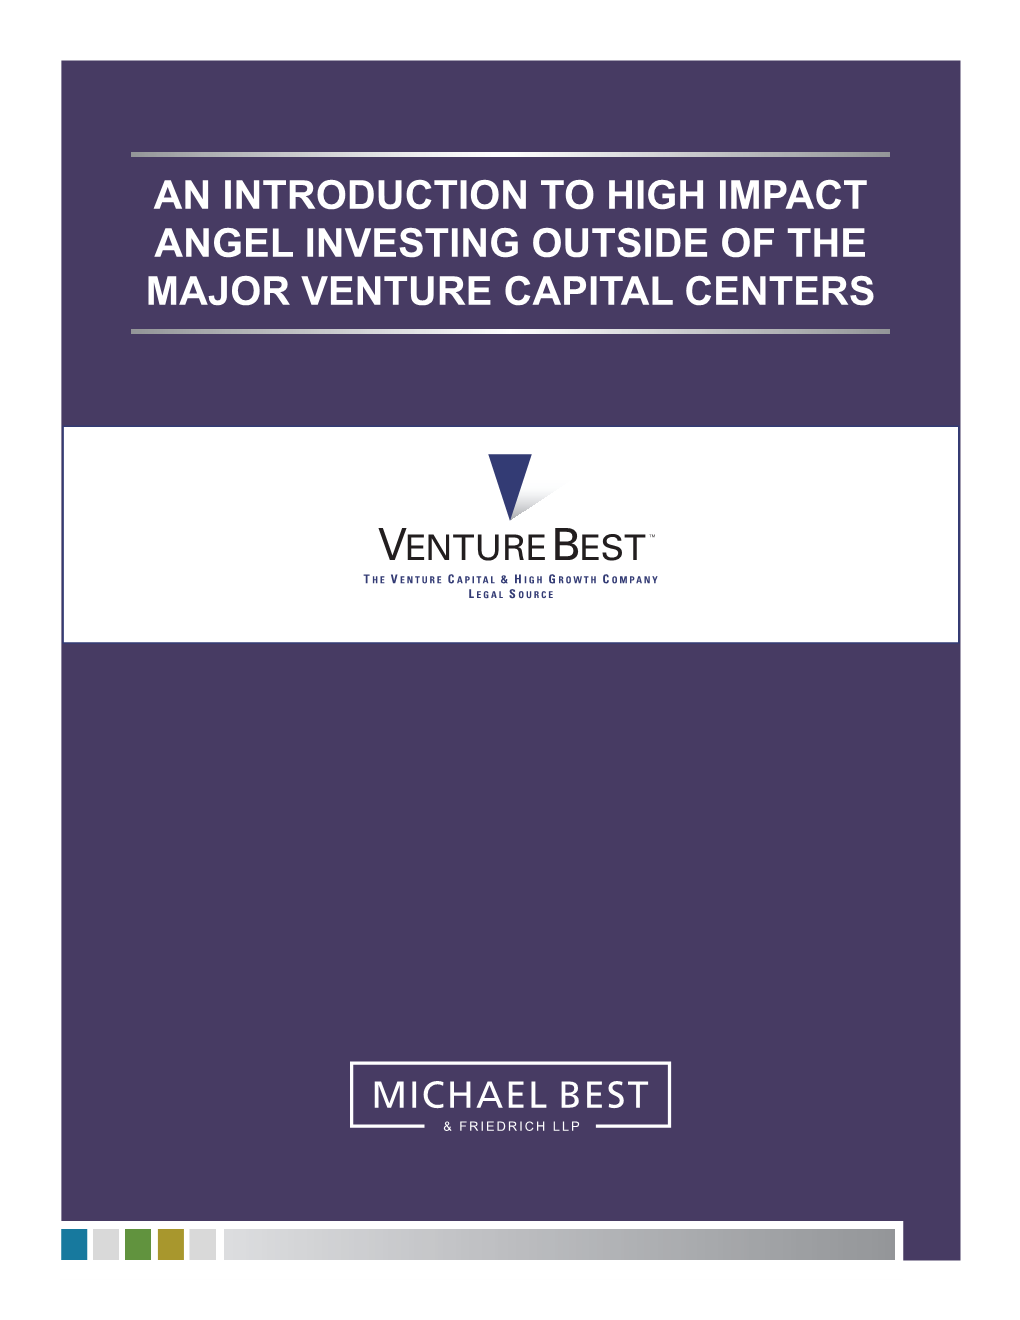 Introduction to High Impact Angel Investing Outside of the Major Venture Capital Centers